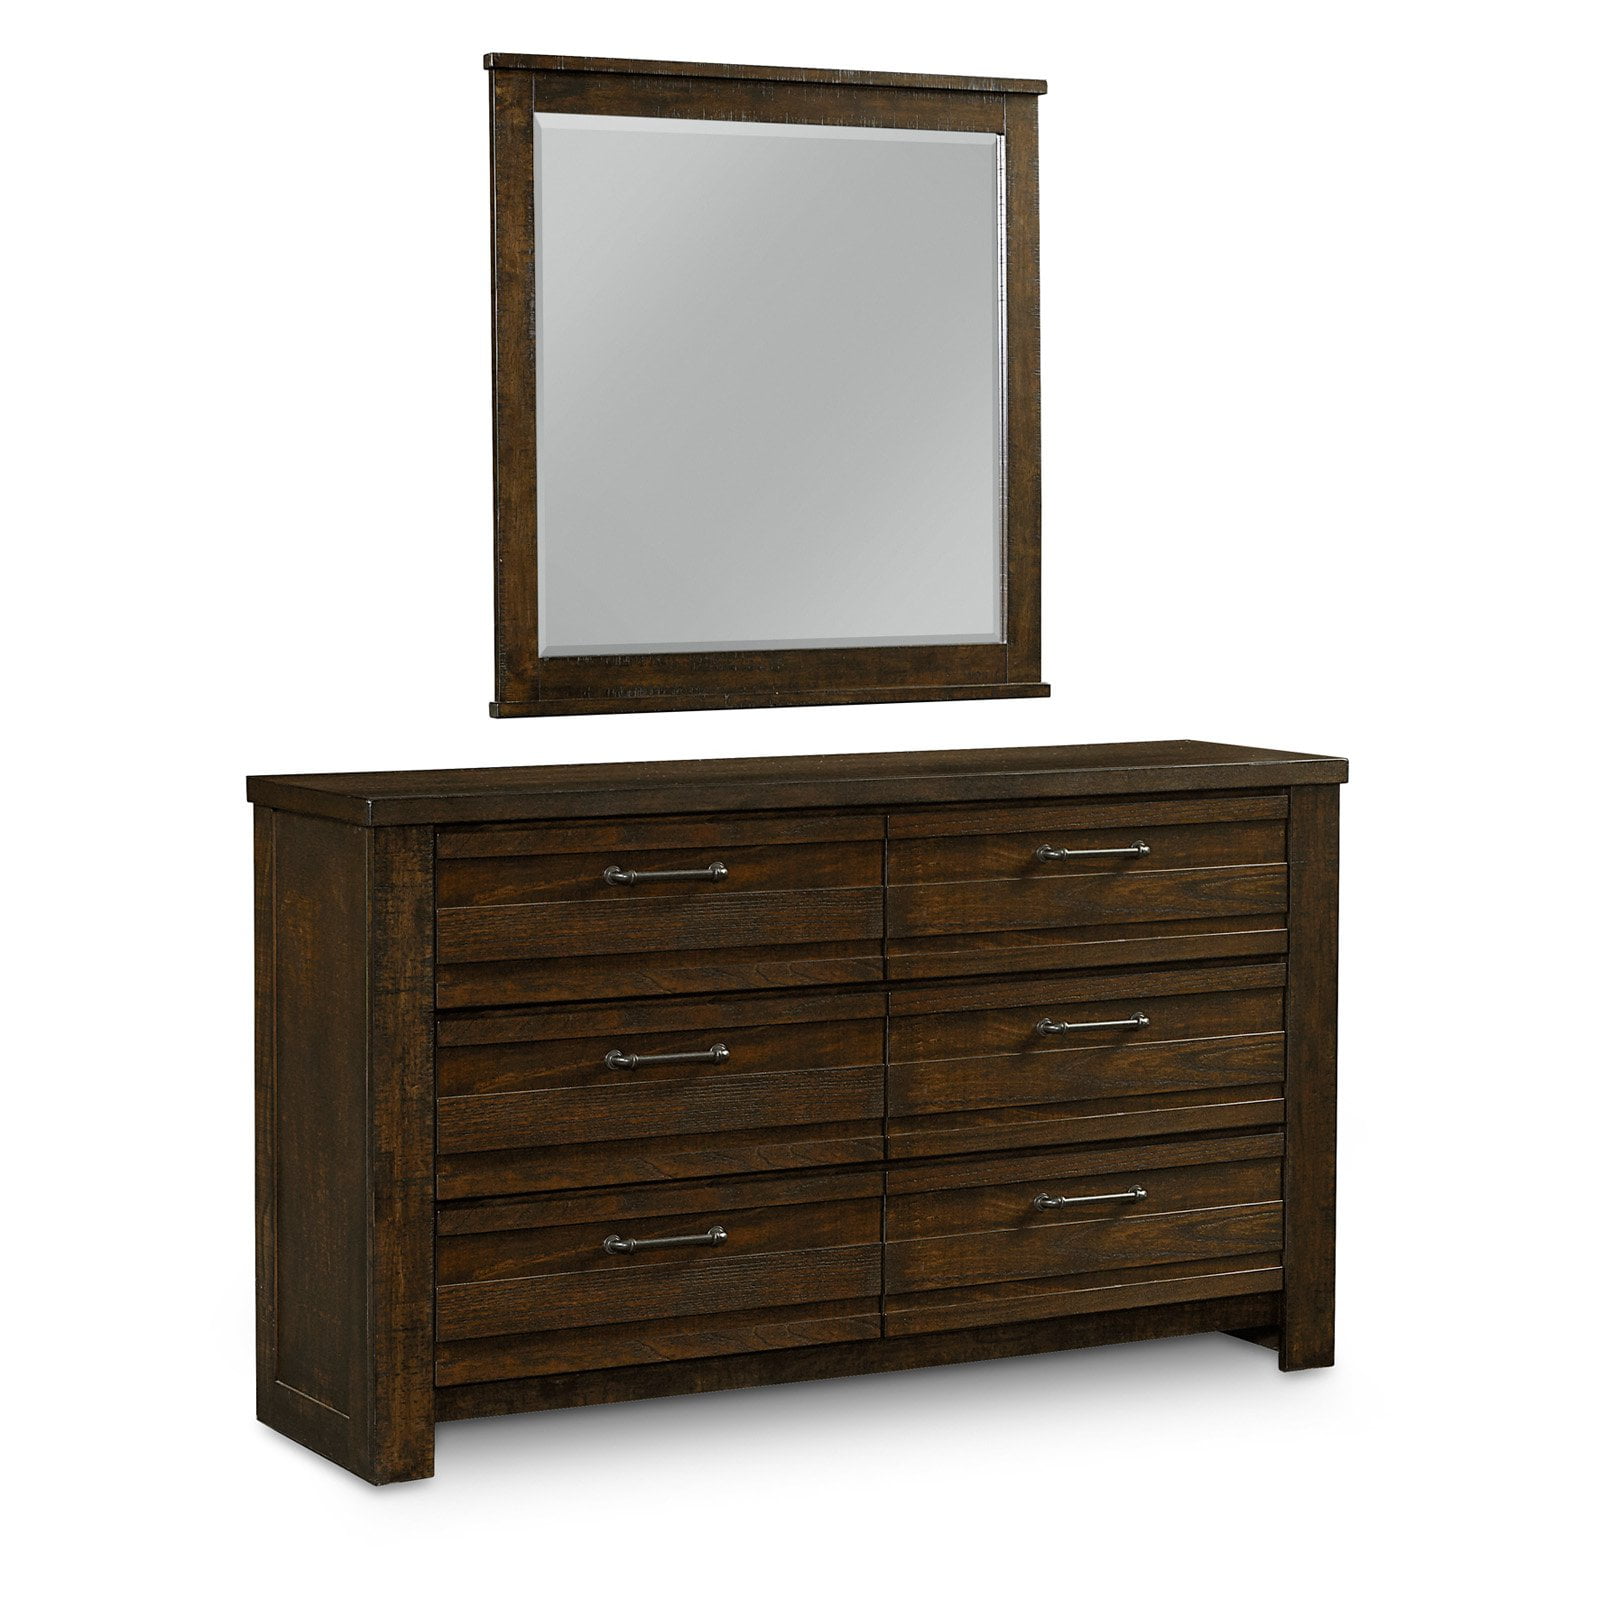 Photo 1 of MIRROR ONLY NOT DRESSER Samuel Lawrence Furniture Ruff Hewn 6-Drawer Dresser with Optional Mirror